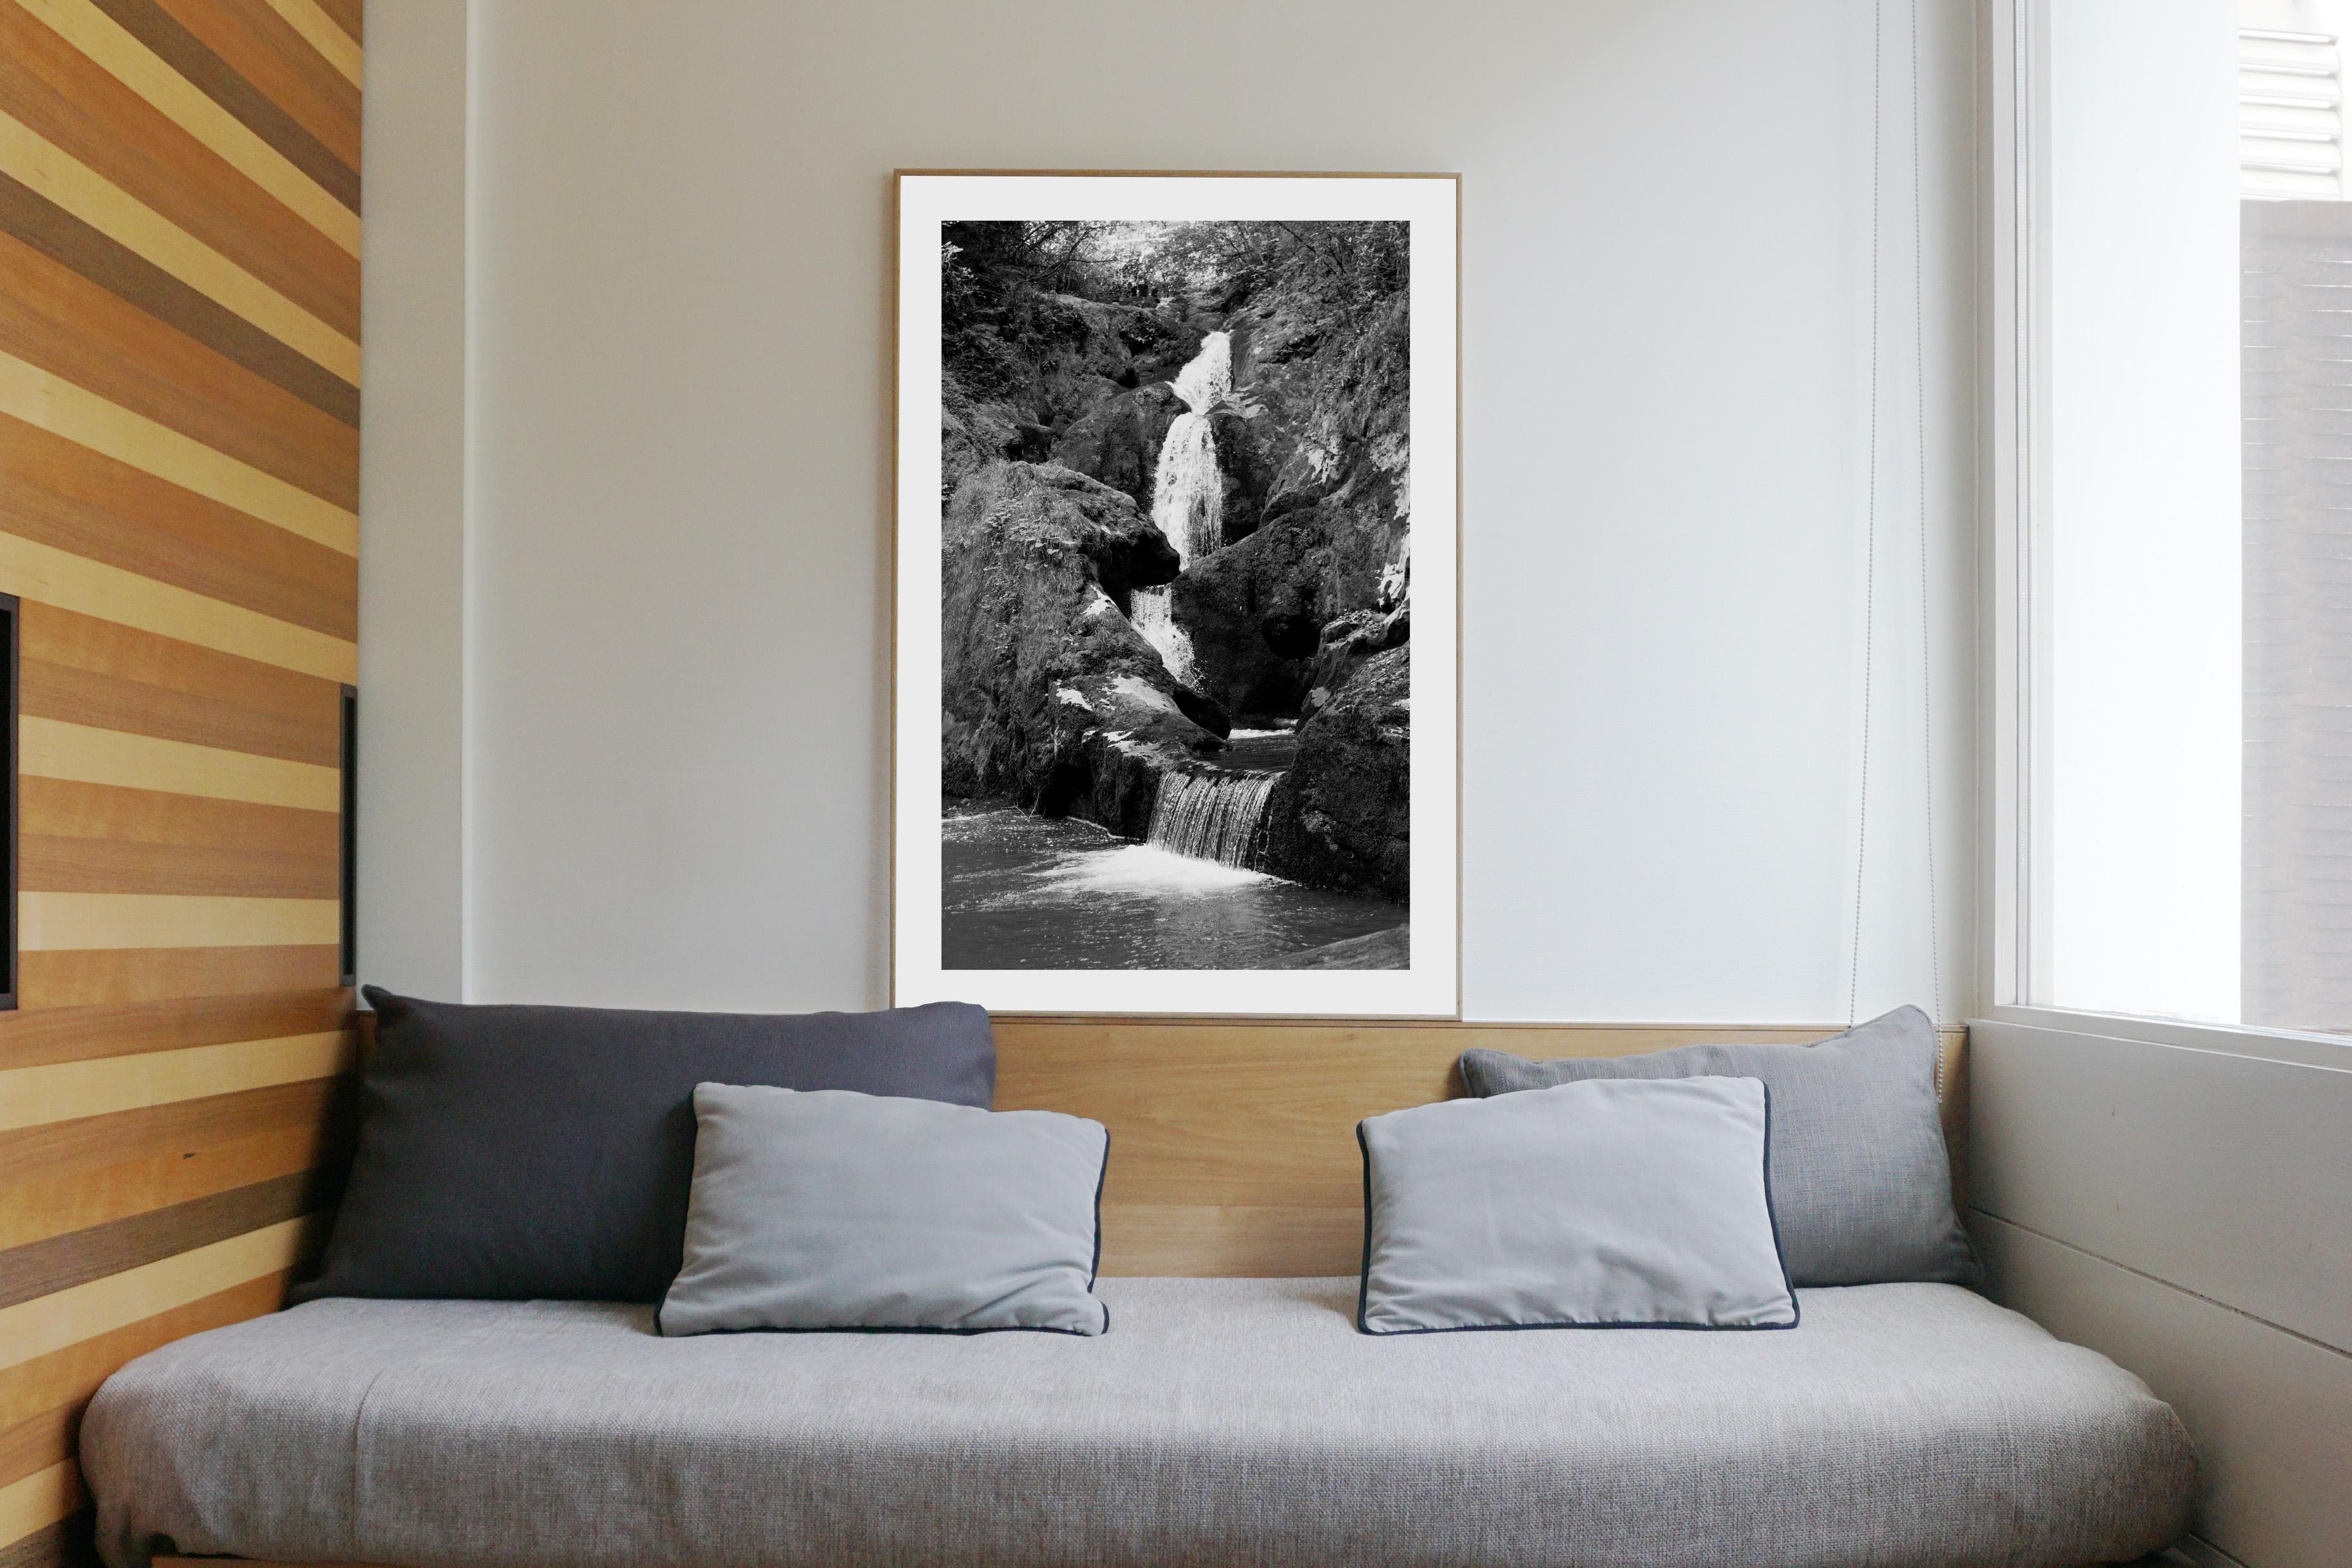 Vertical Black and White Giclée of Zen Forest Waterfall, Landscape, Feng Shui - Photograph by Kind of Cyan